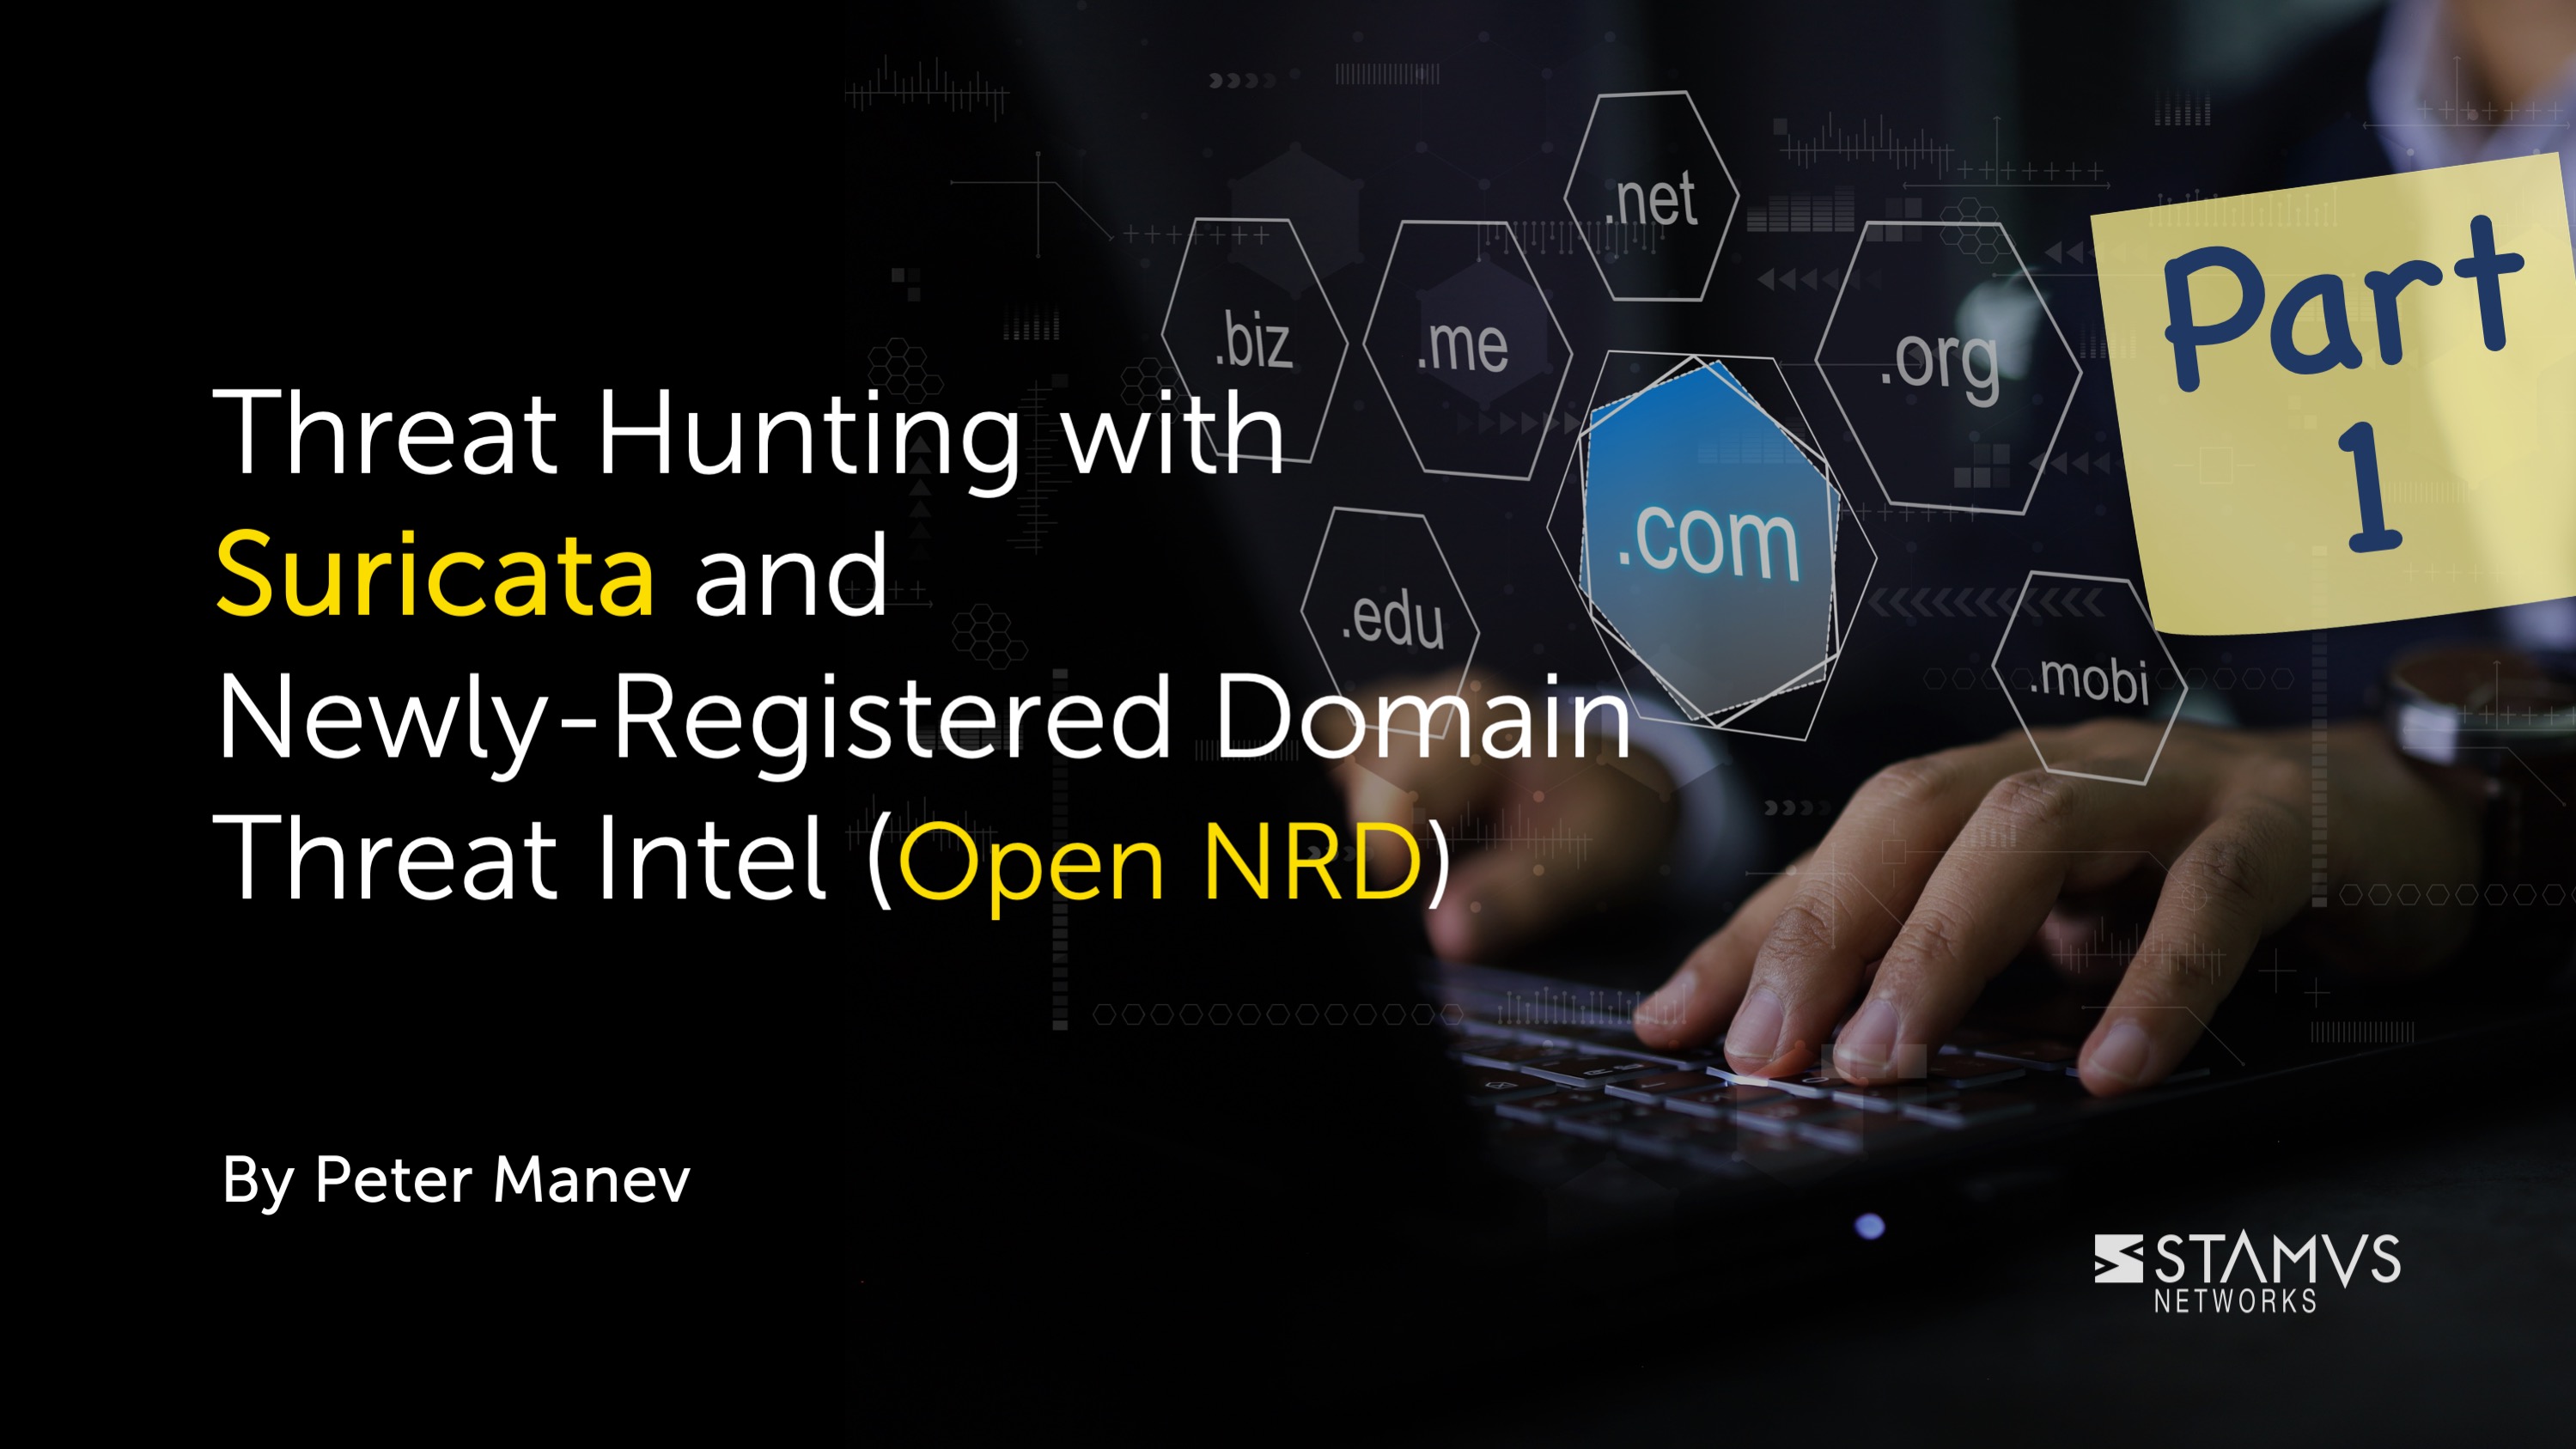 Threat Hunting with Suricata and Newly-Registered Domain Threat Intel (Open NRD) by Peter Manev